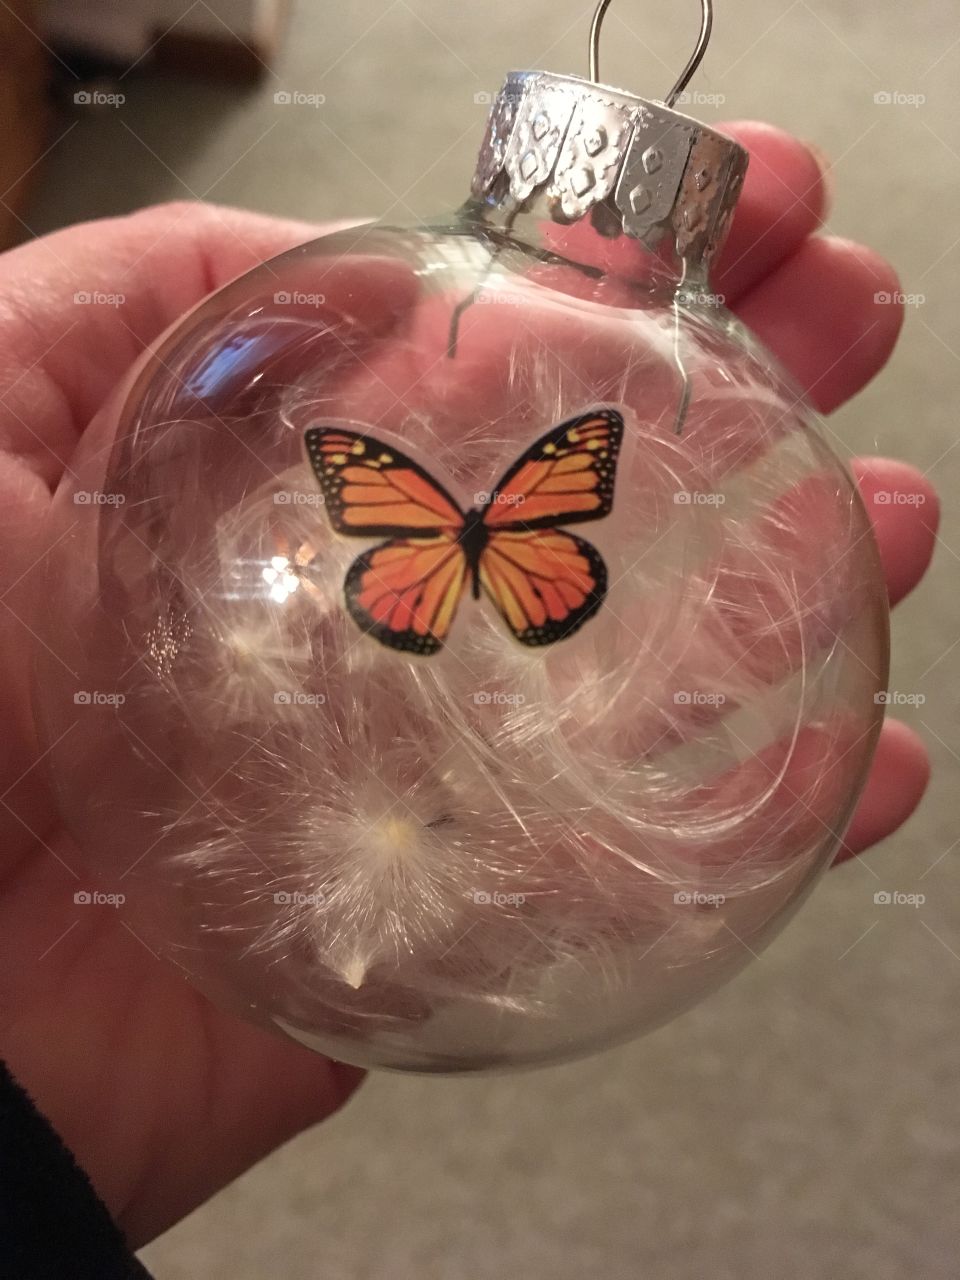 Hand holding glass glove butterfly fly ornament